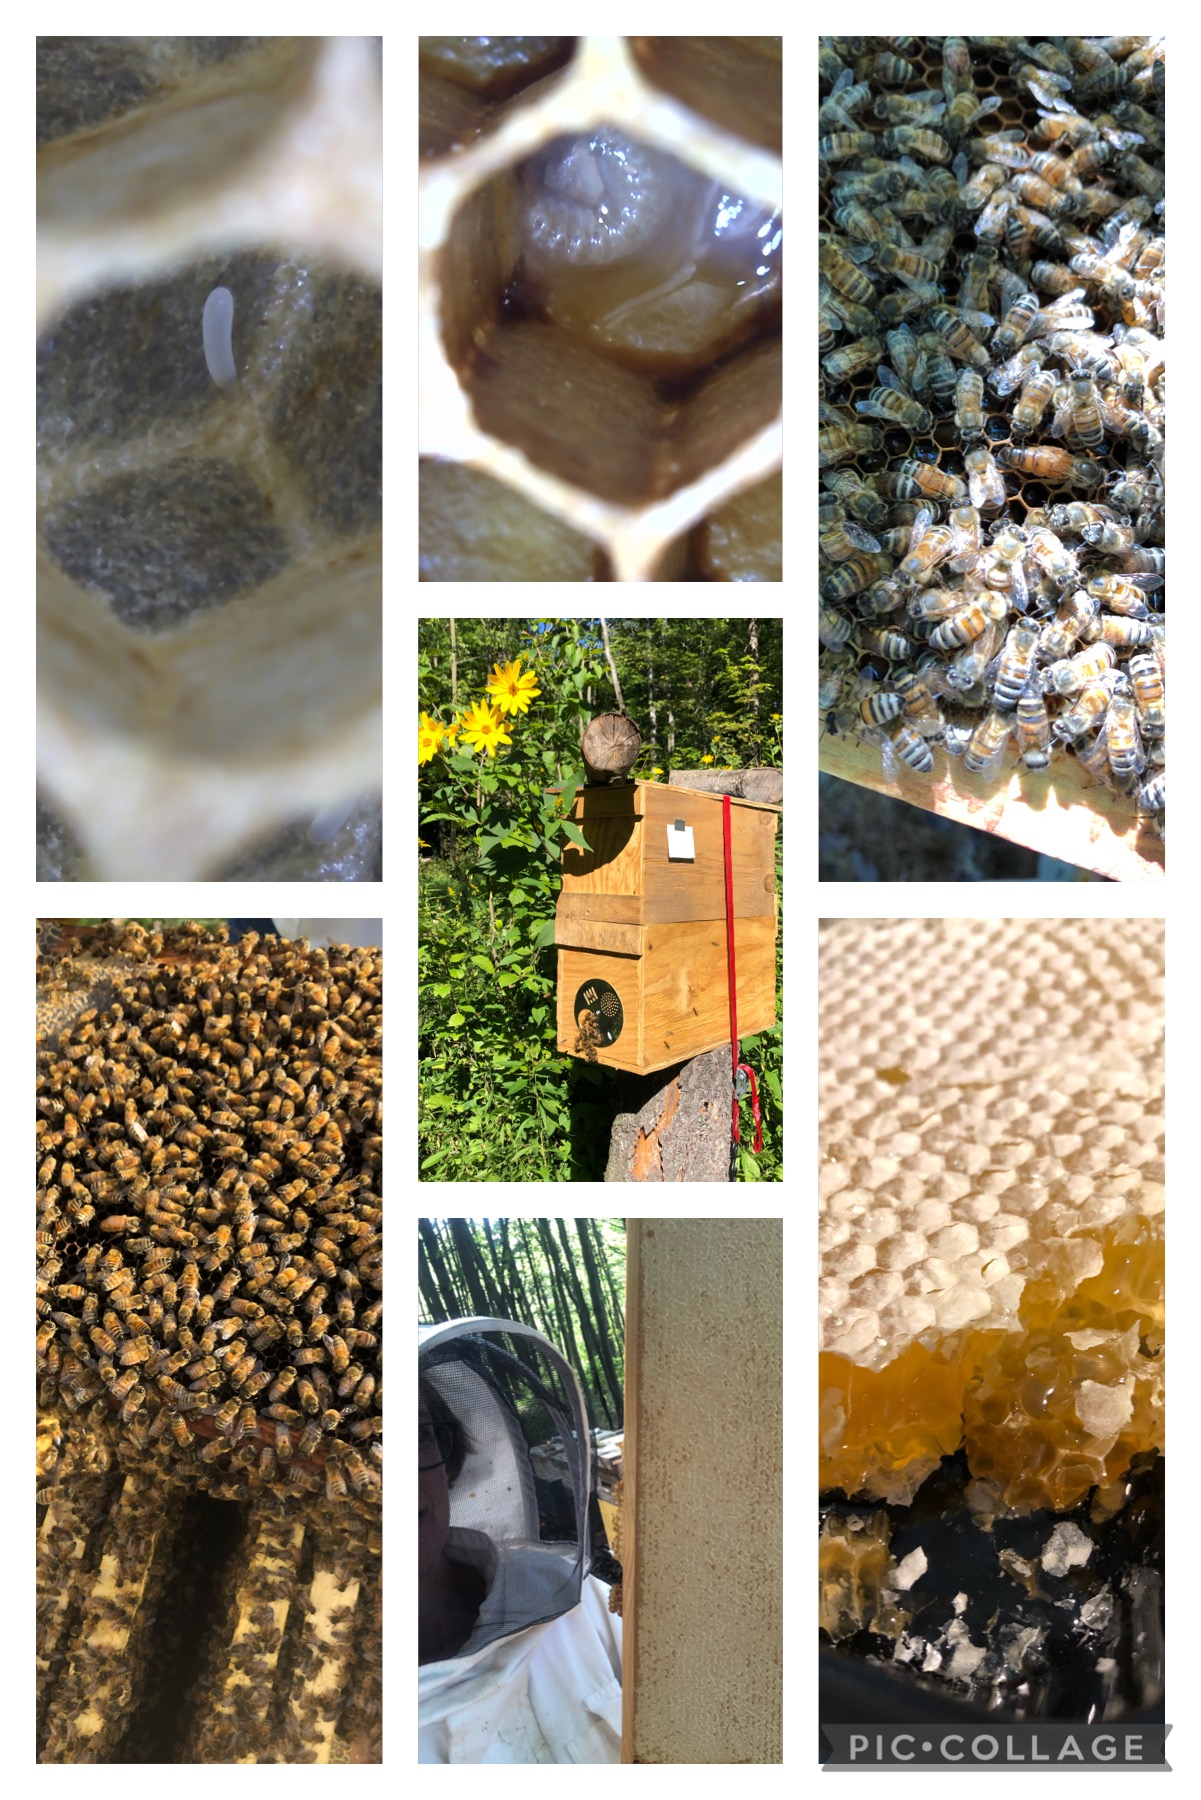 Image shows a pic collage of the life cycle of honeybee.  Egg, larvae and bee stages as well as a beekeeper and harvested honeycomb.